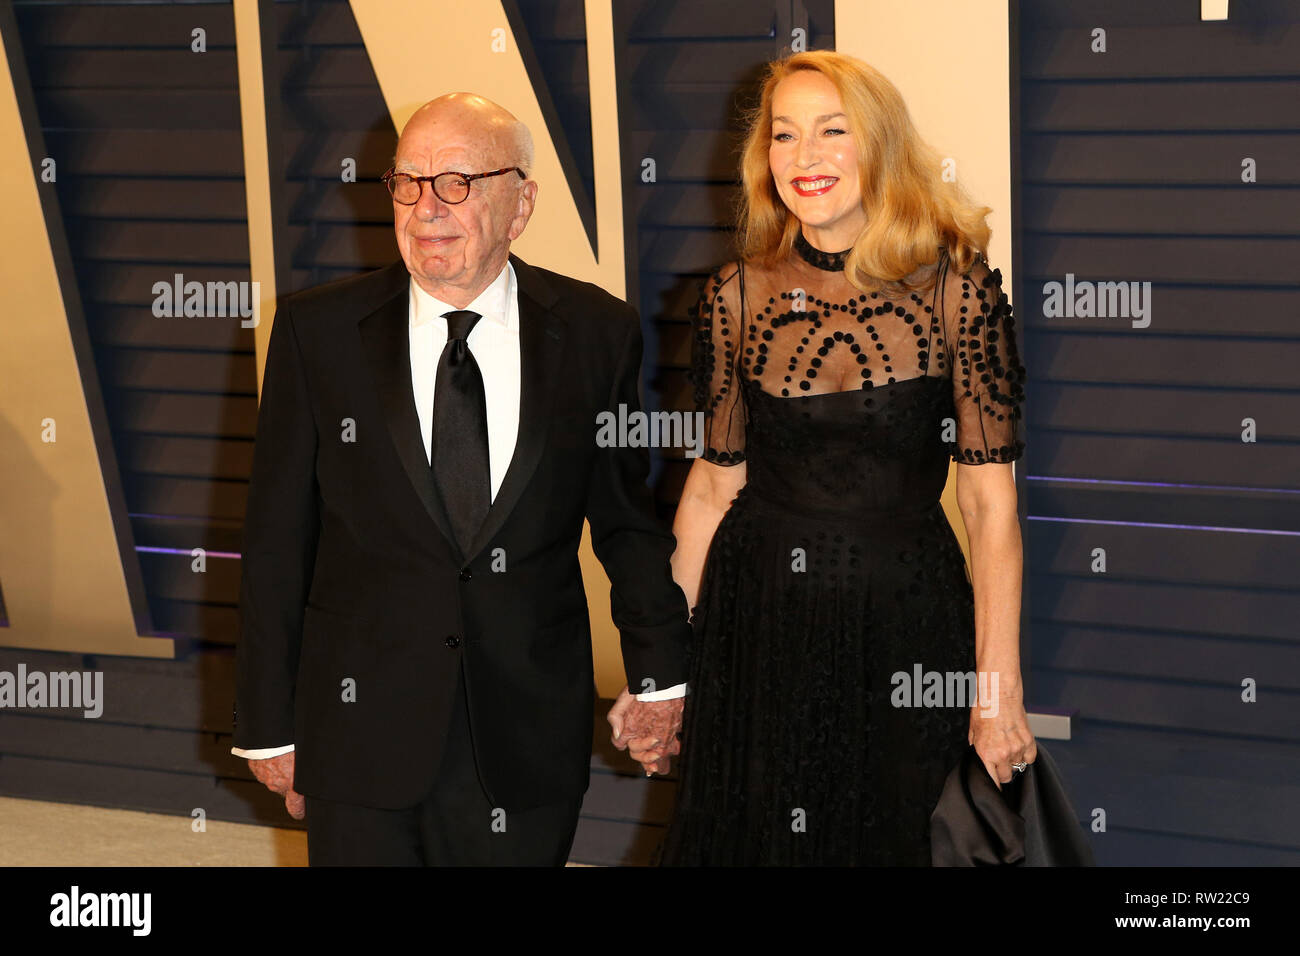 Beverly Hills, CA, USA. 24th Feb, 2019. LOS ANGELES - FEB 24: Rupert Murdoch, Jerry Hall at the 2019 Vanity Fair Oscar Party on the Wallis Annenberg Center for the Performing Arts on February 24, 2019 in Beverly Hills, CA Credit: Kay Blake/ZUMA Wire/Alamy Live News Stock Photo